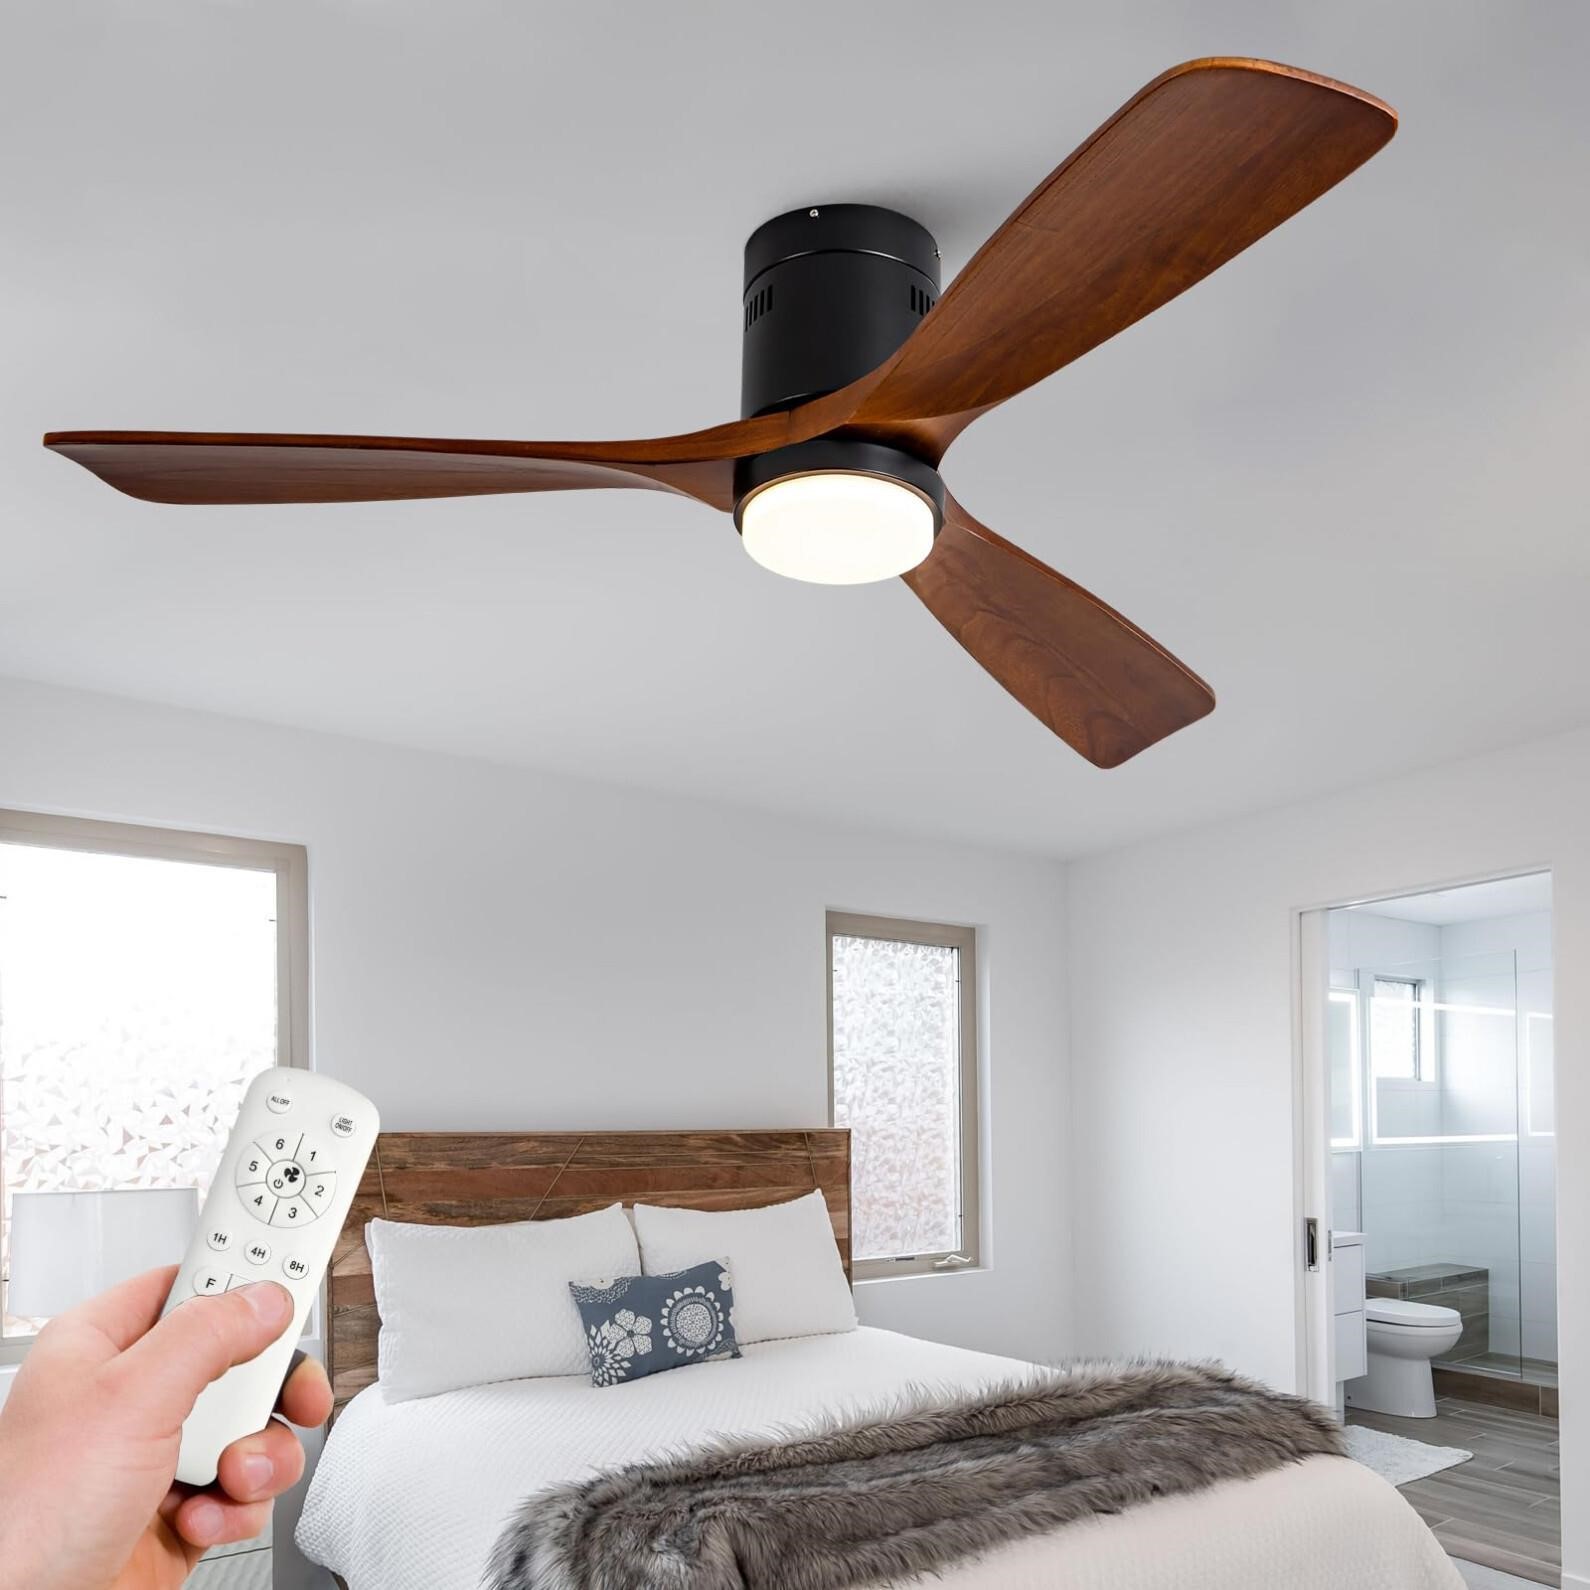 BOJUE 52 Inch Ceiling Fans with Lights, Low Profil